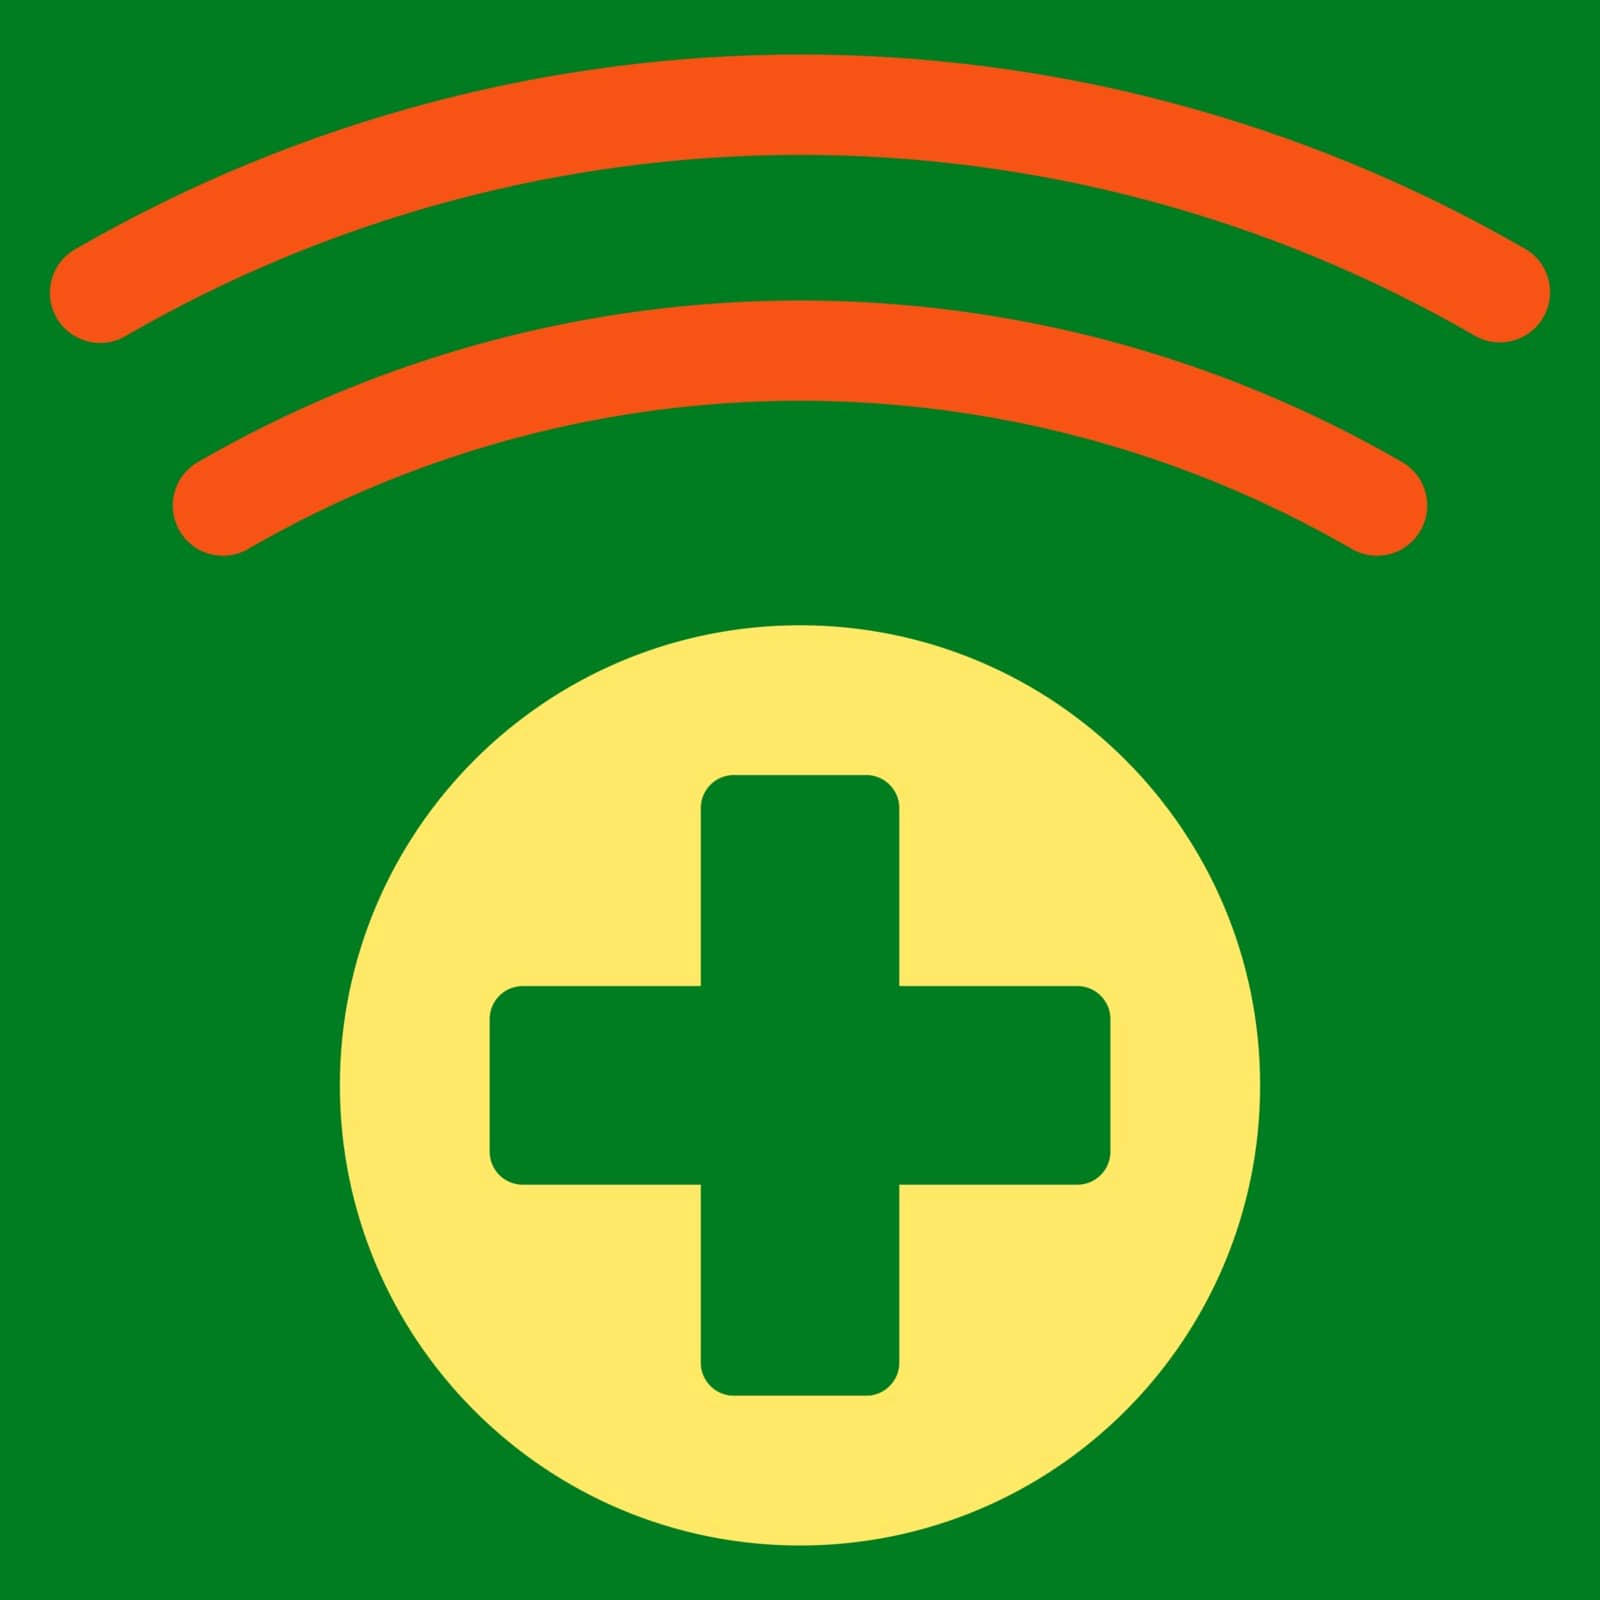 Medical Source vector icon. Style is bicolor flat symbol, orange and yellow colors, rounded angles, green background.